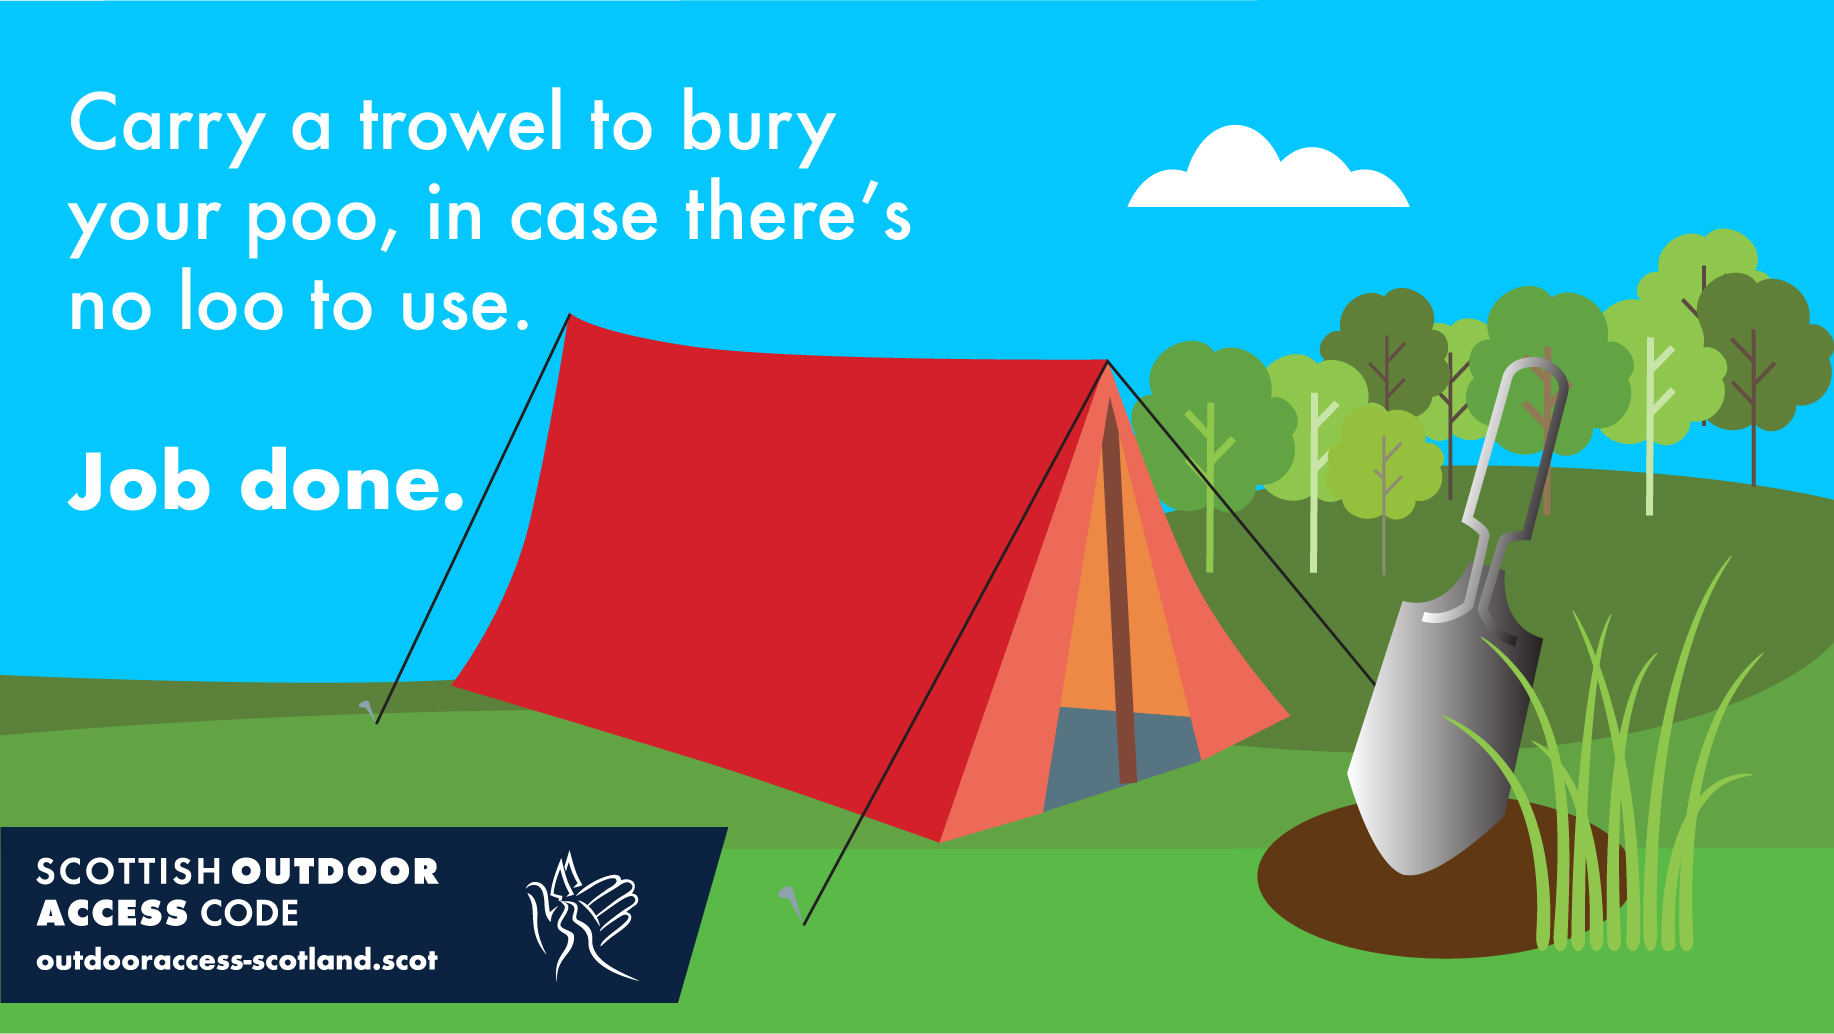 Carry a trowel to bury your poo.